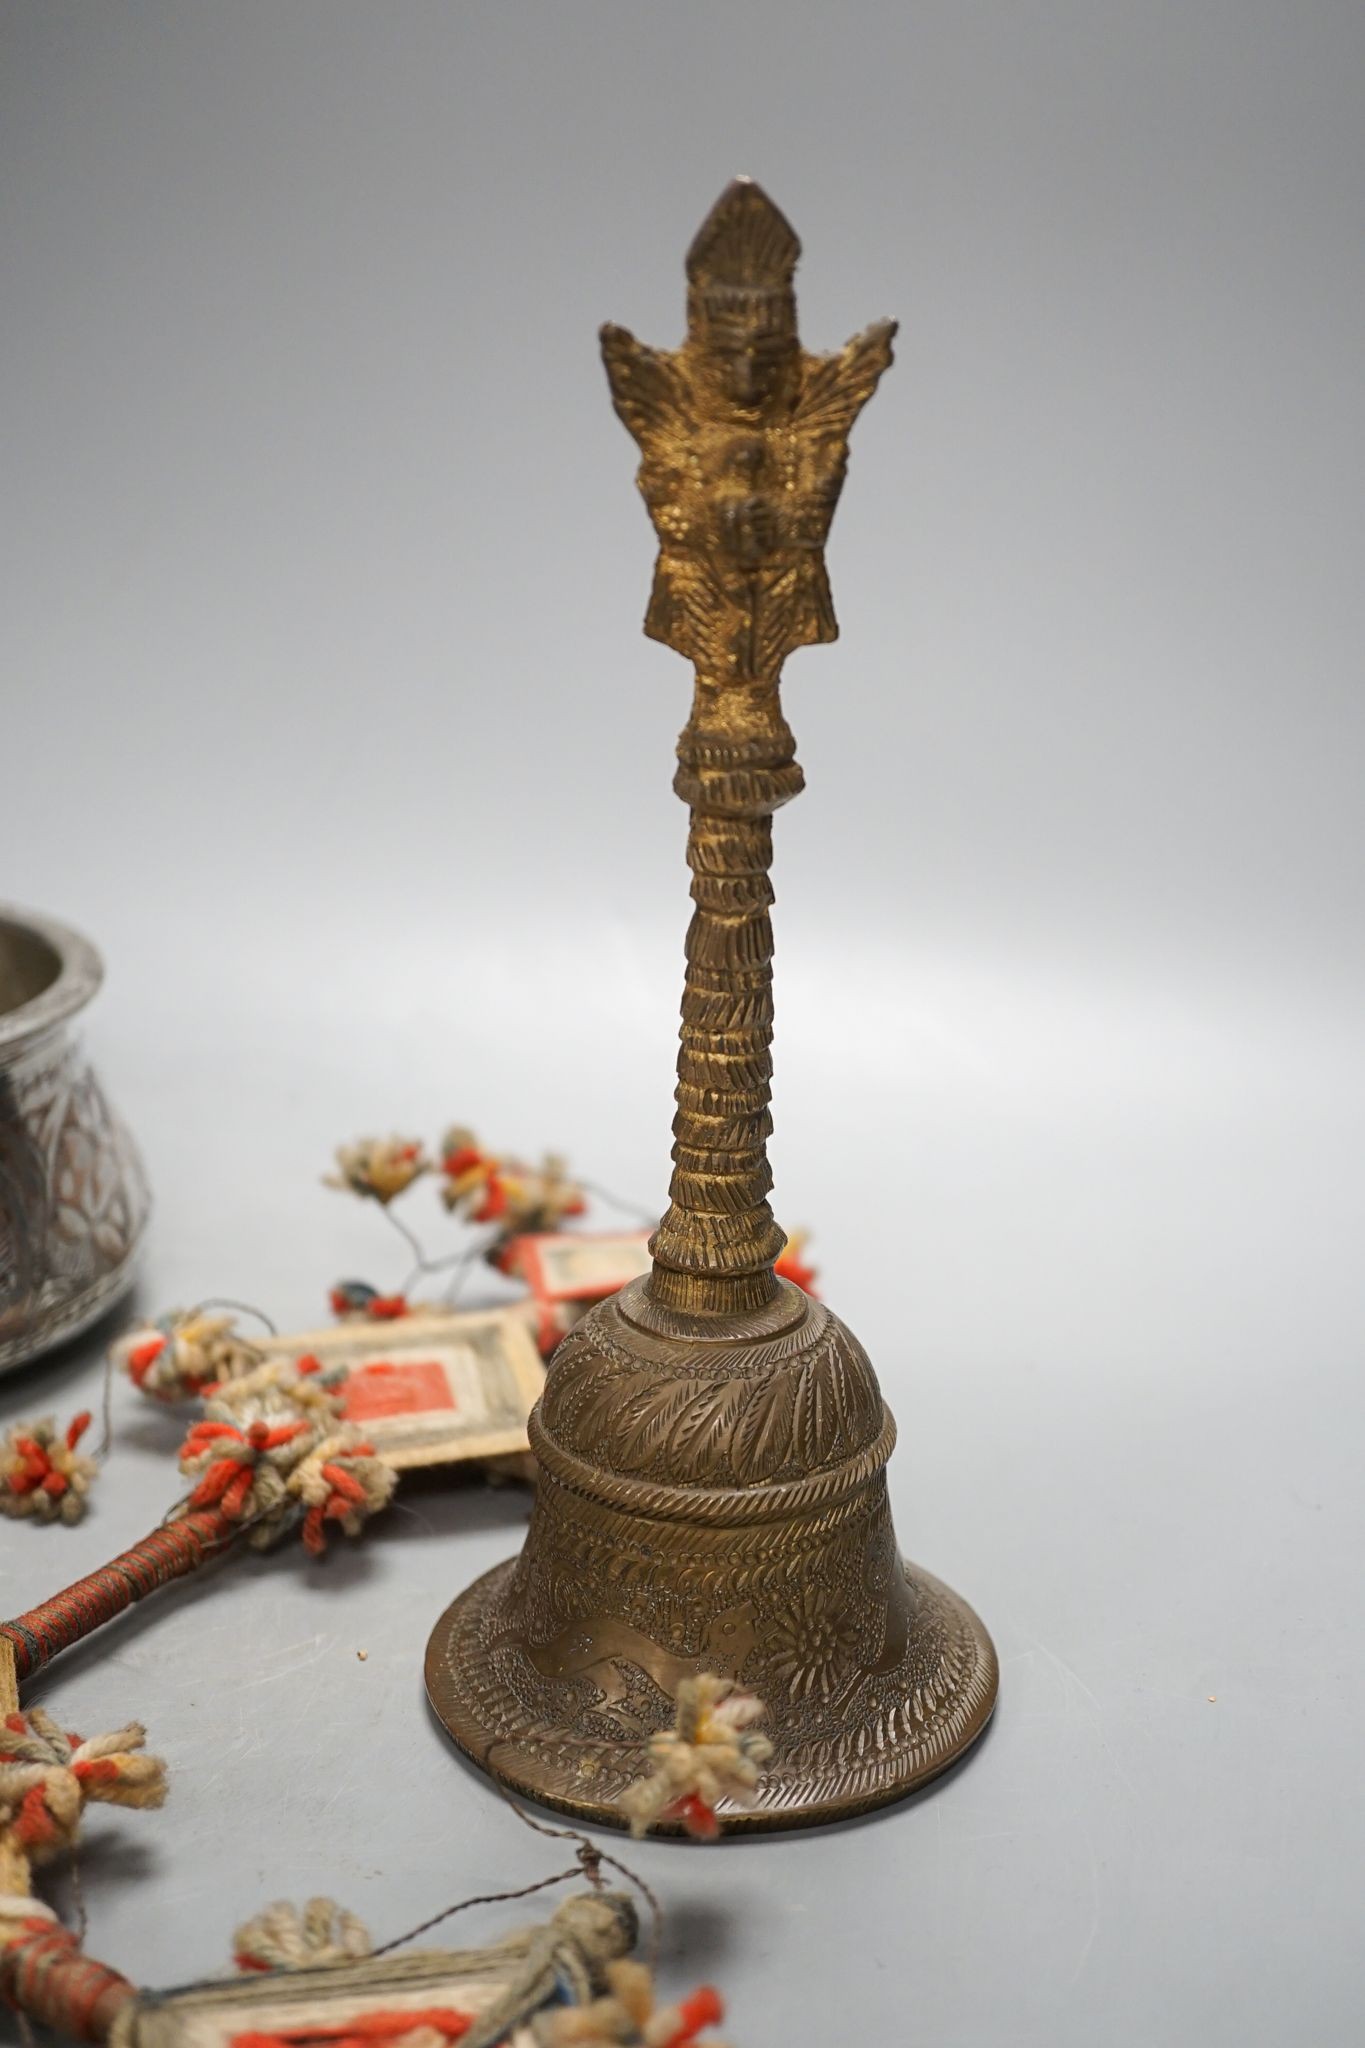 A Himalayan brass bell and bowl, a woolwork finial, 43 cm high, an Islamic tinned metal censer (4)